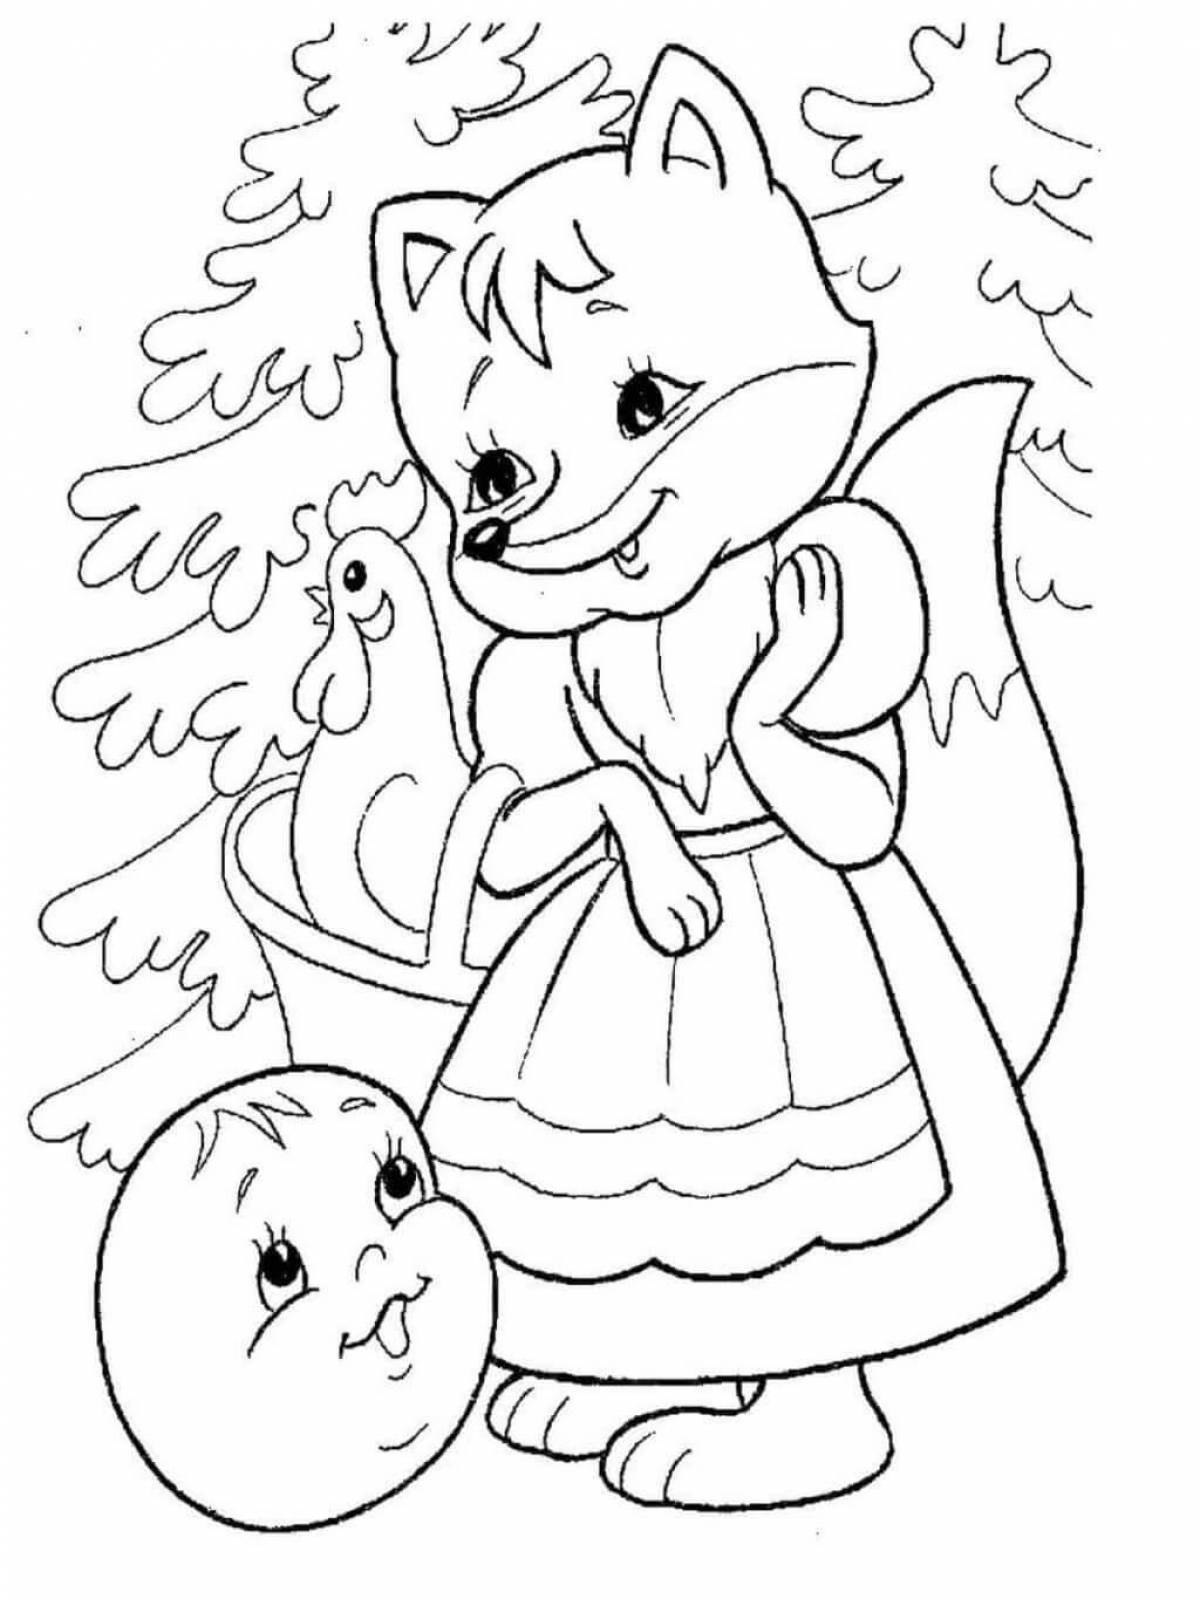 Radiant fox and bunny coloring page